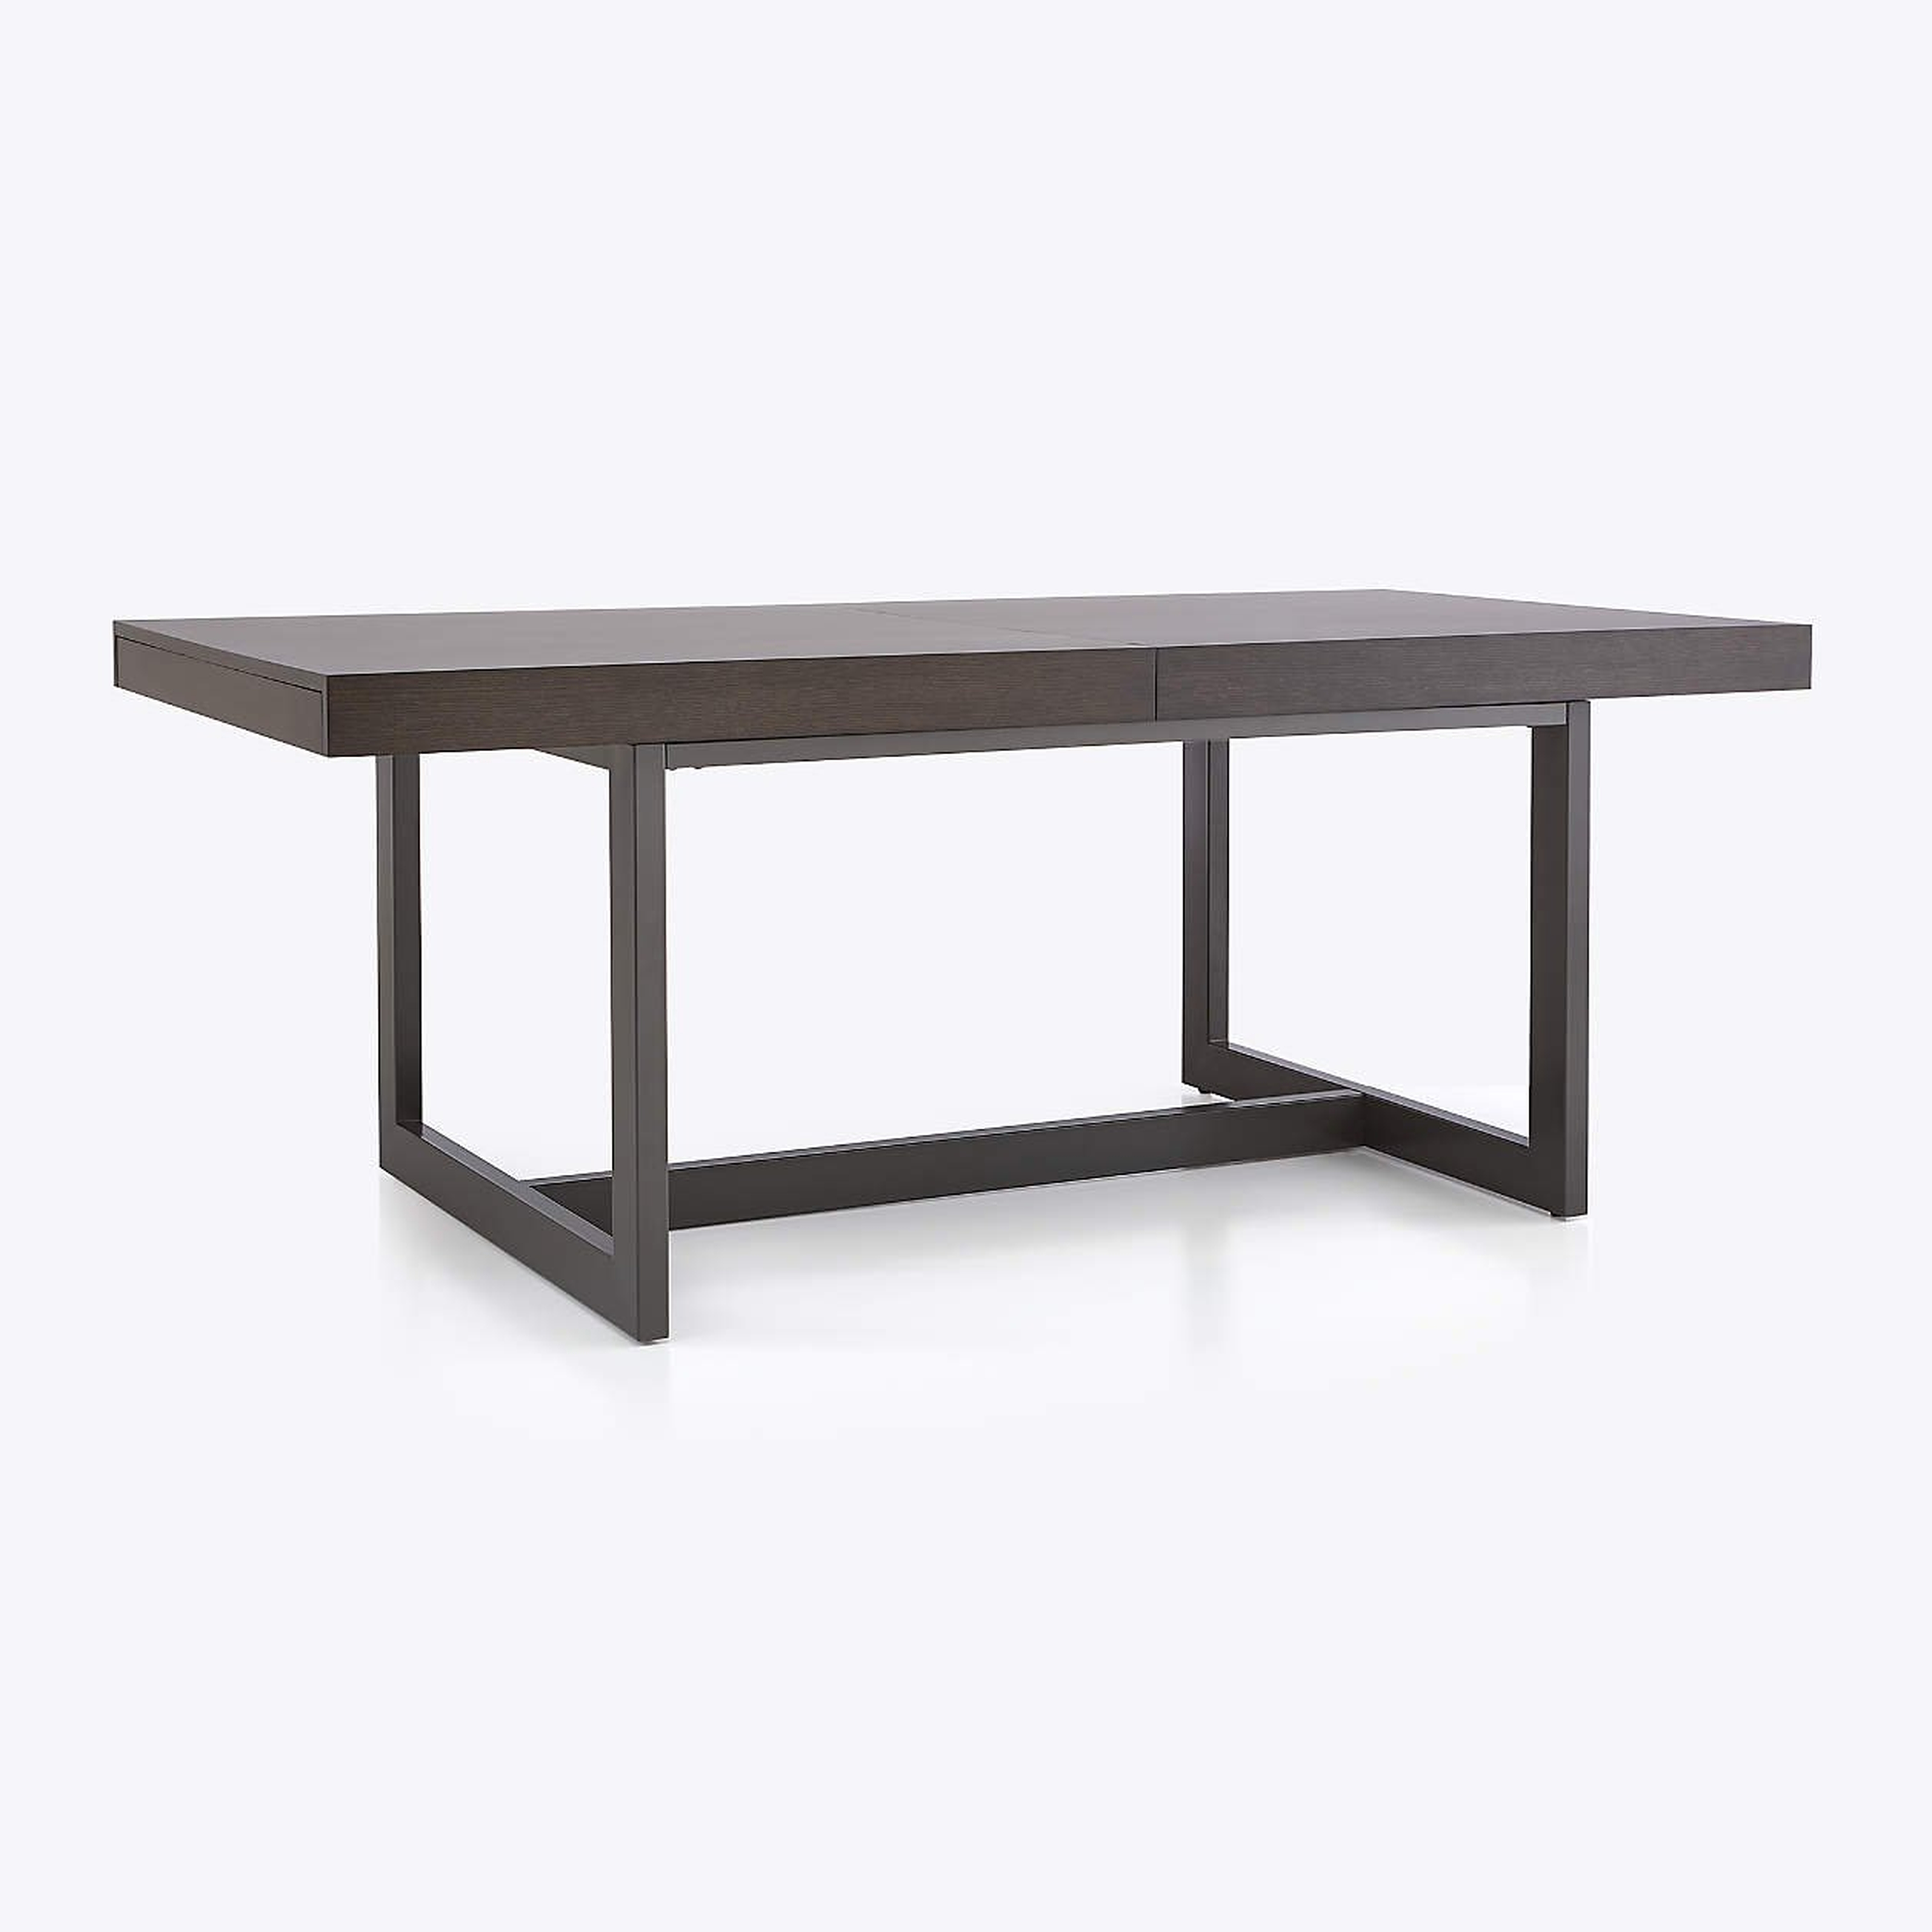 Archive Extension Storage Dining Table - Crate and Barrel